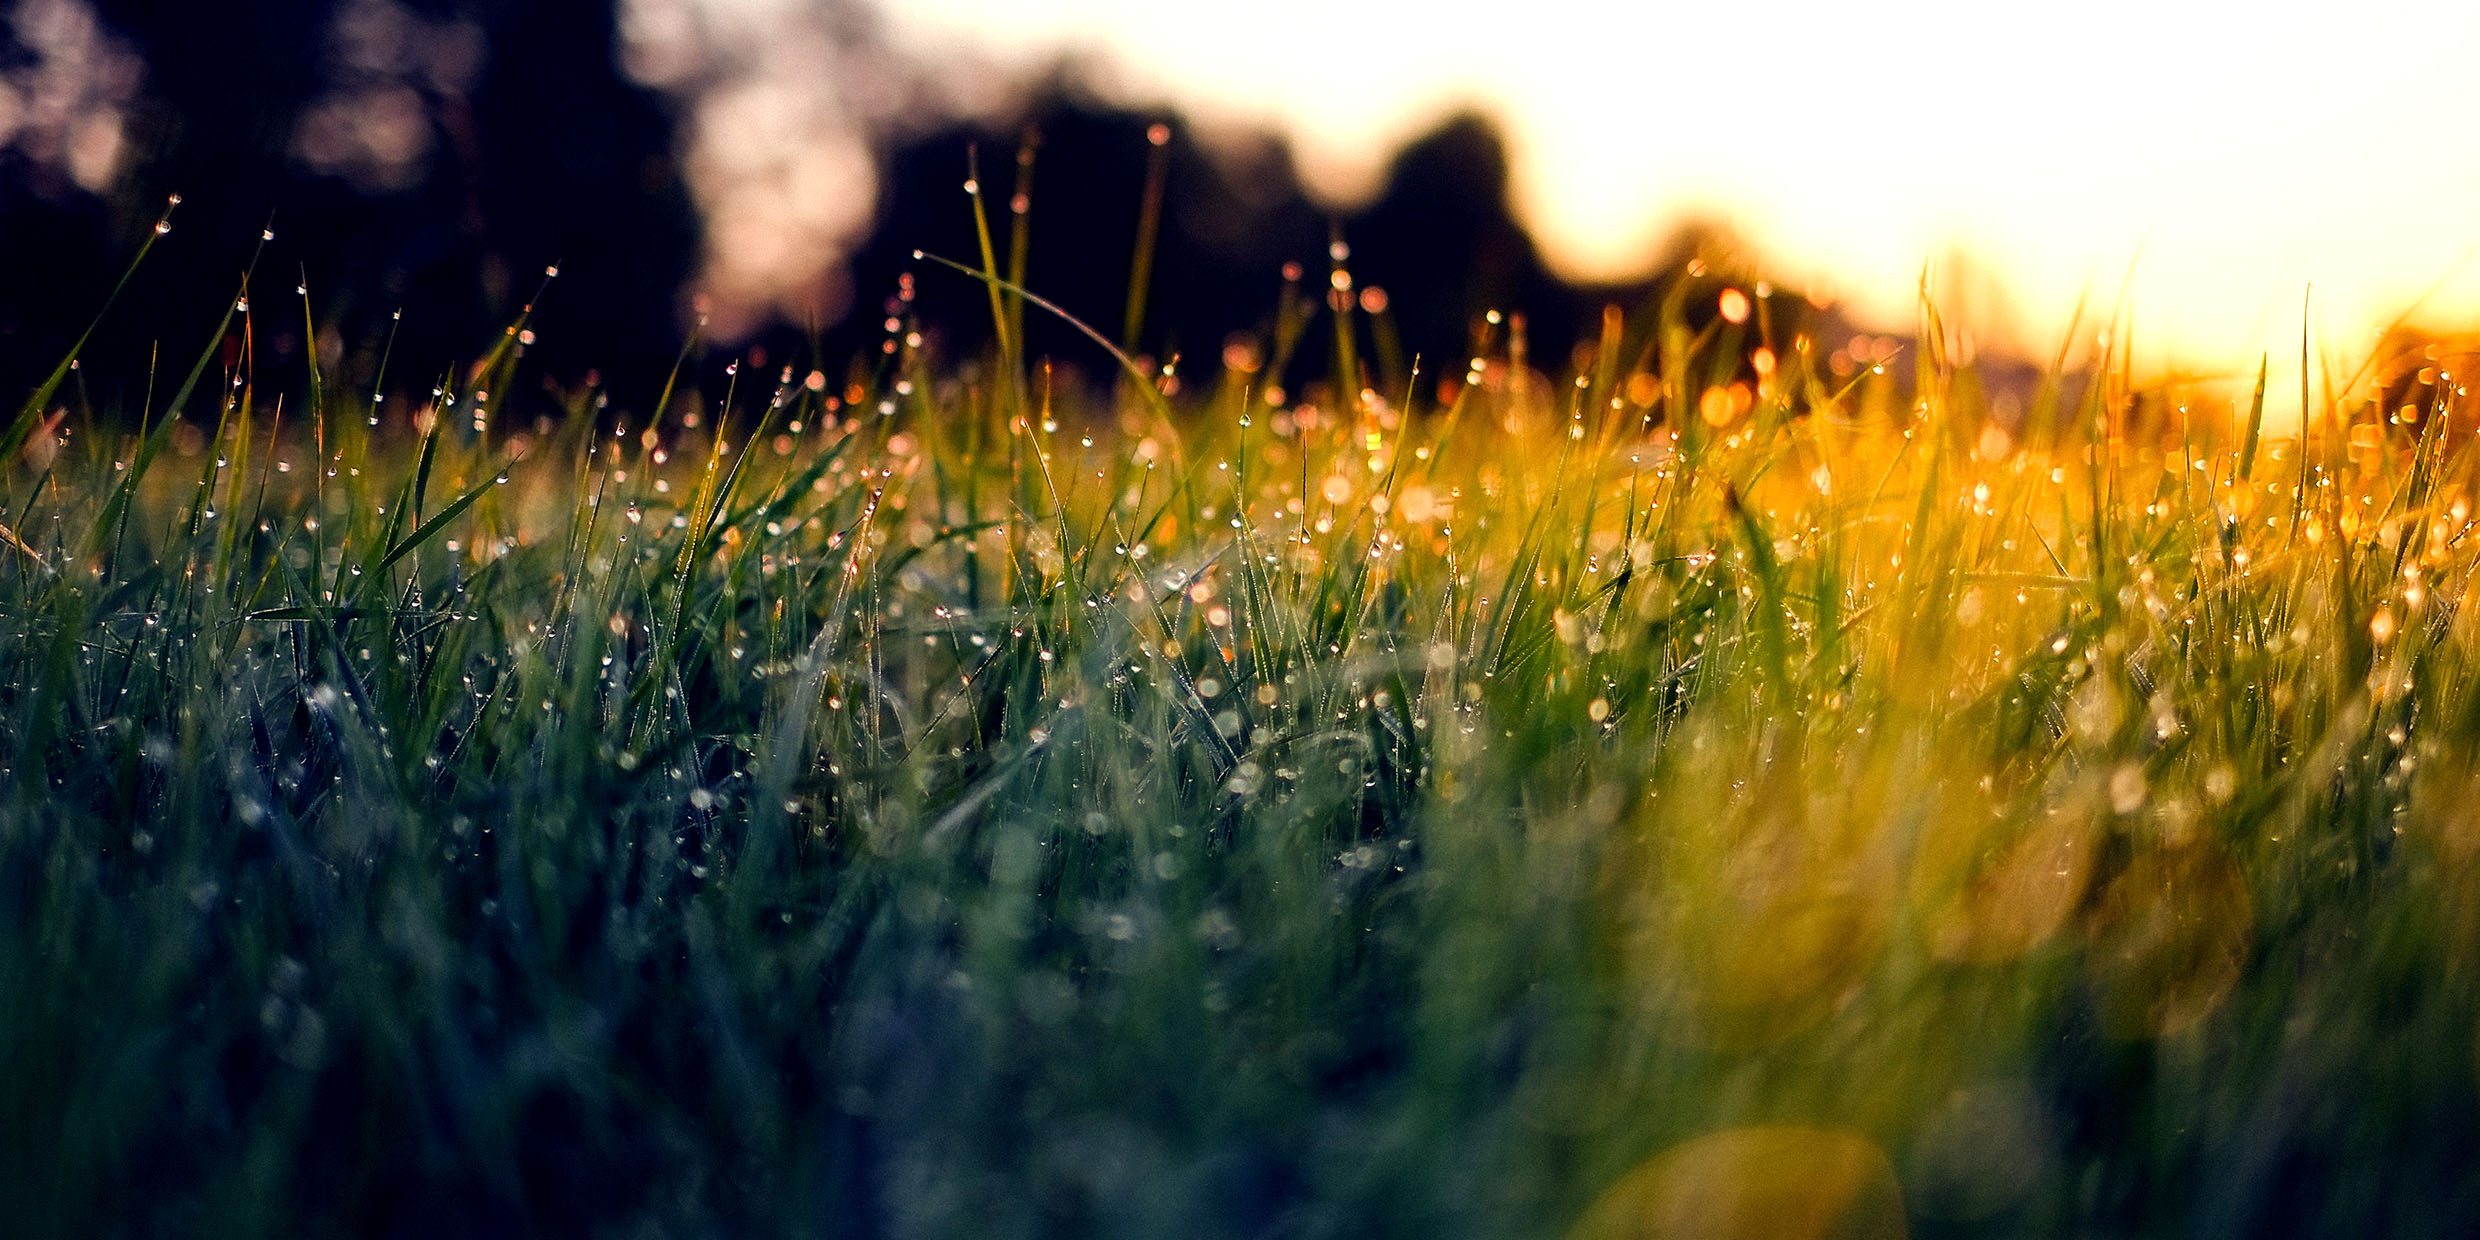 Image of a meadow at sunrise with morning dew collected on grass blades